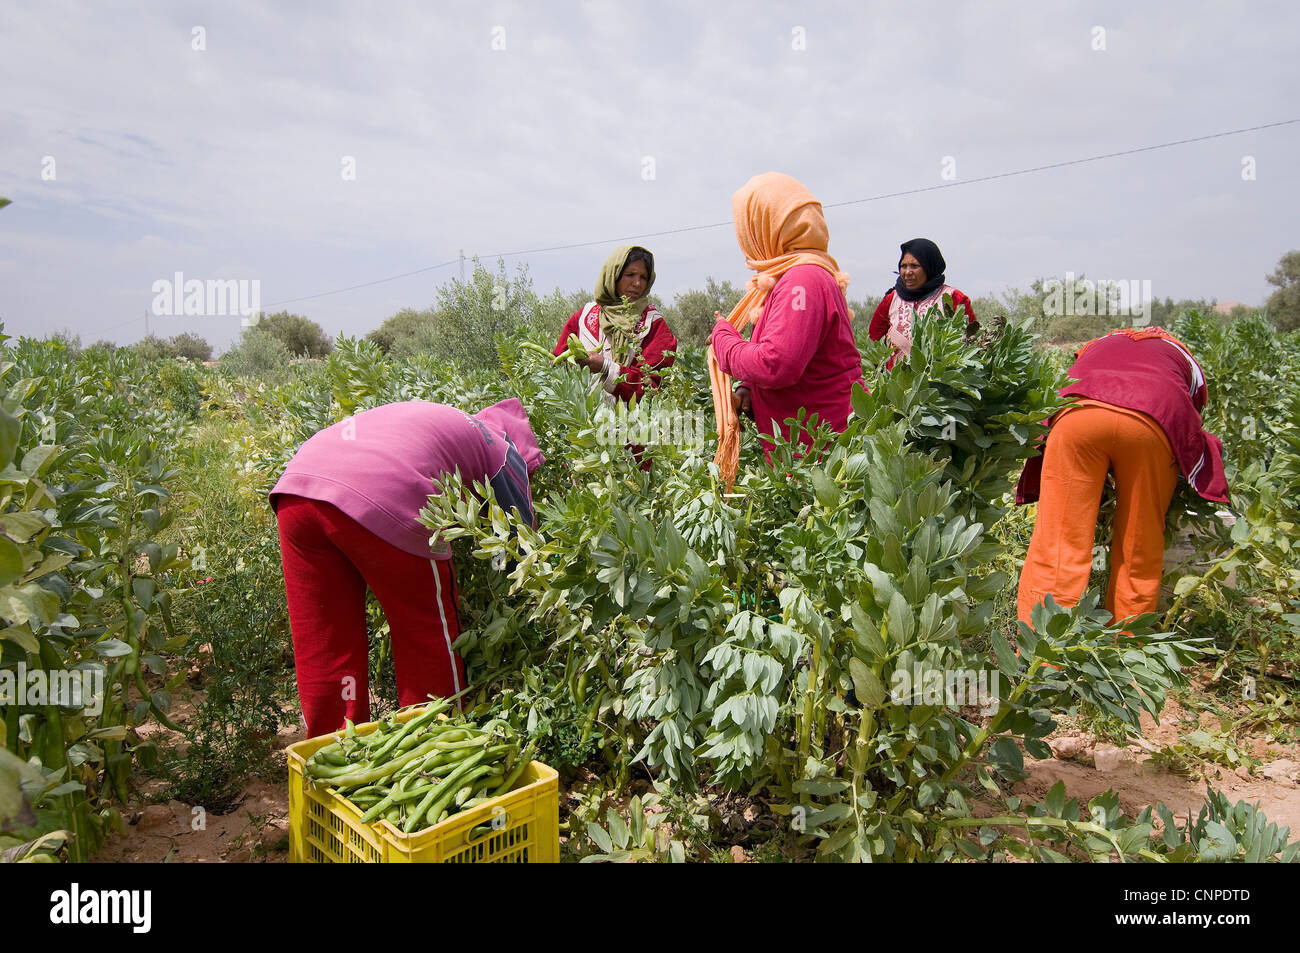 TUNISIA: Women working on fields earn a very low income and do hard manual work. Stock Photo